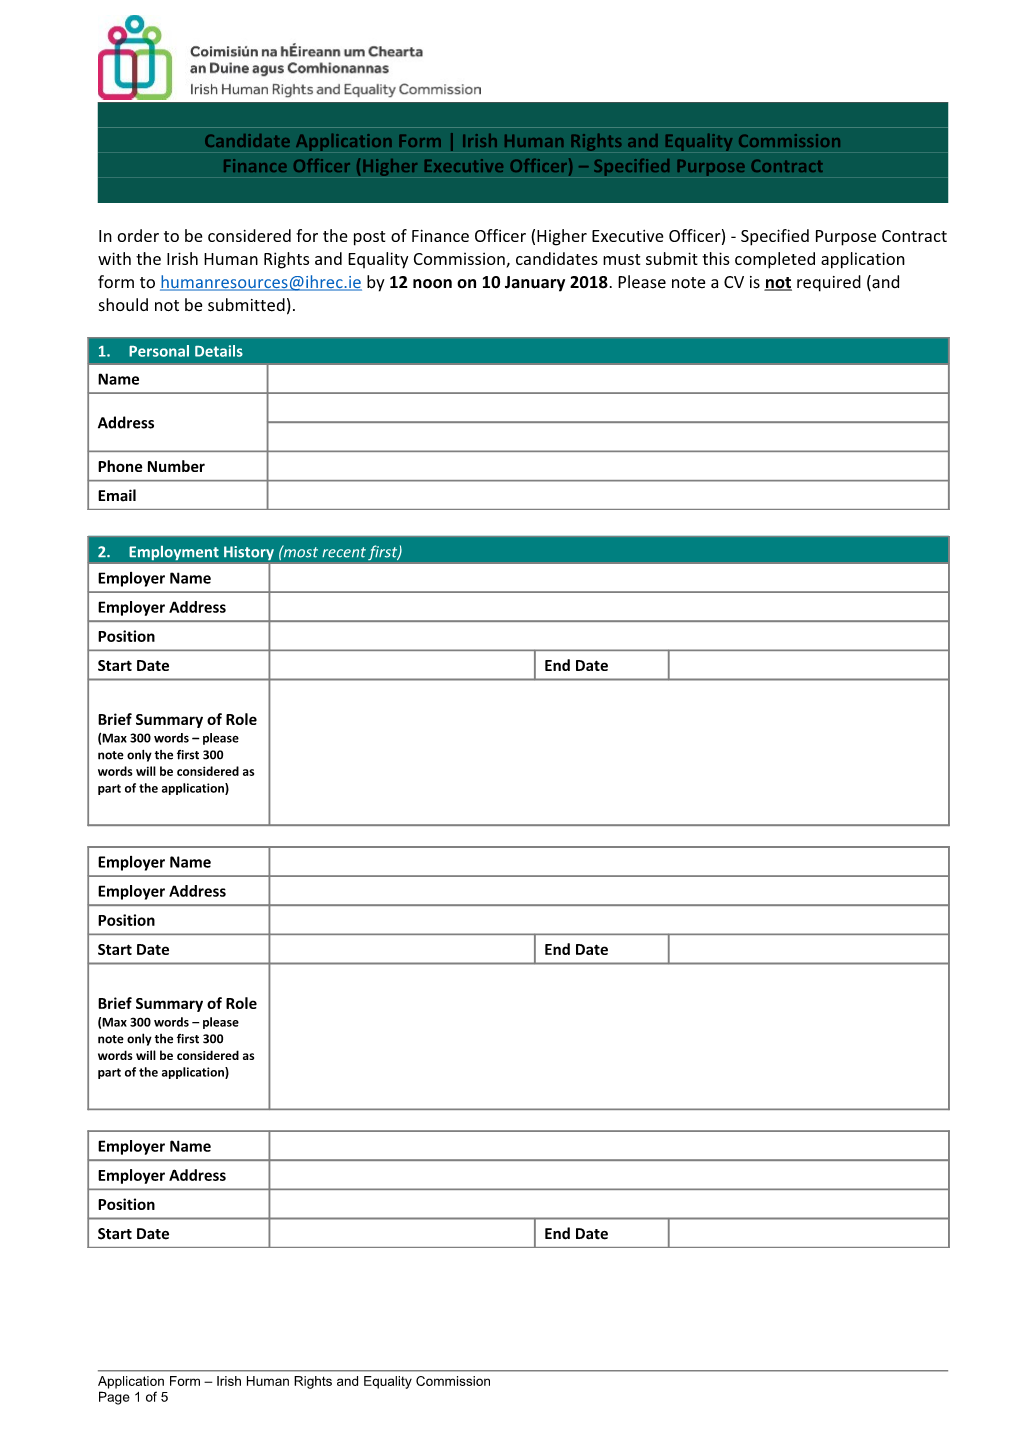 Candidate Application Form Irish Human Rights and Equality Commission